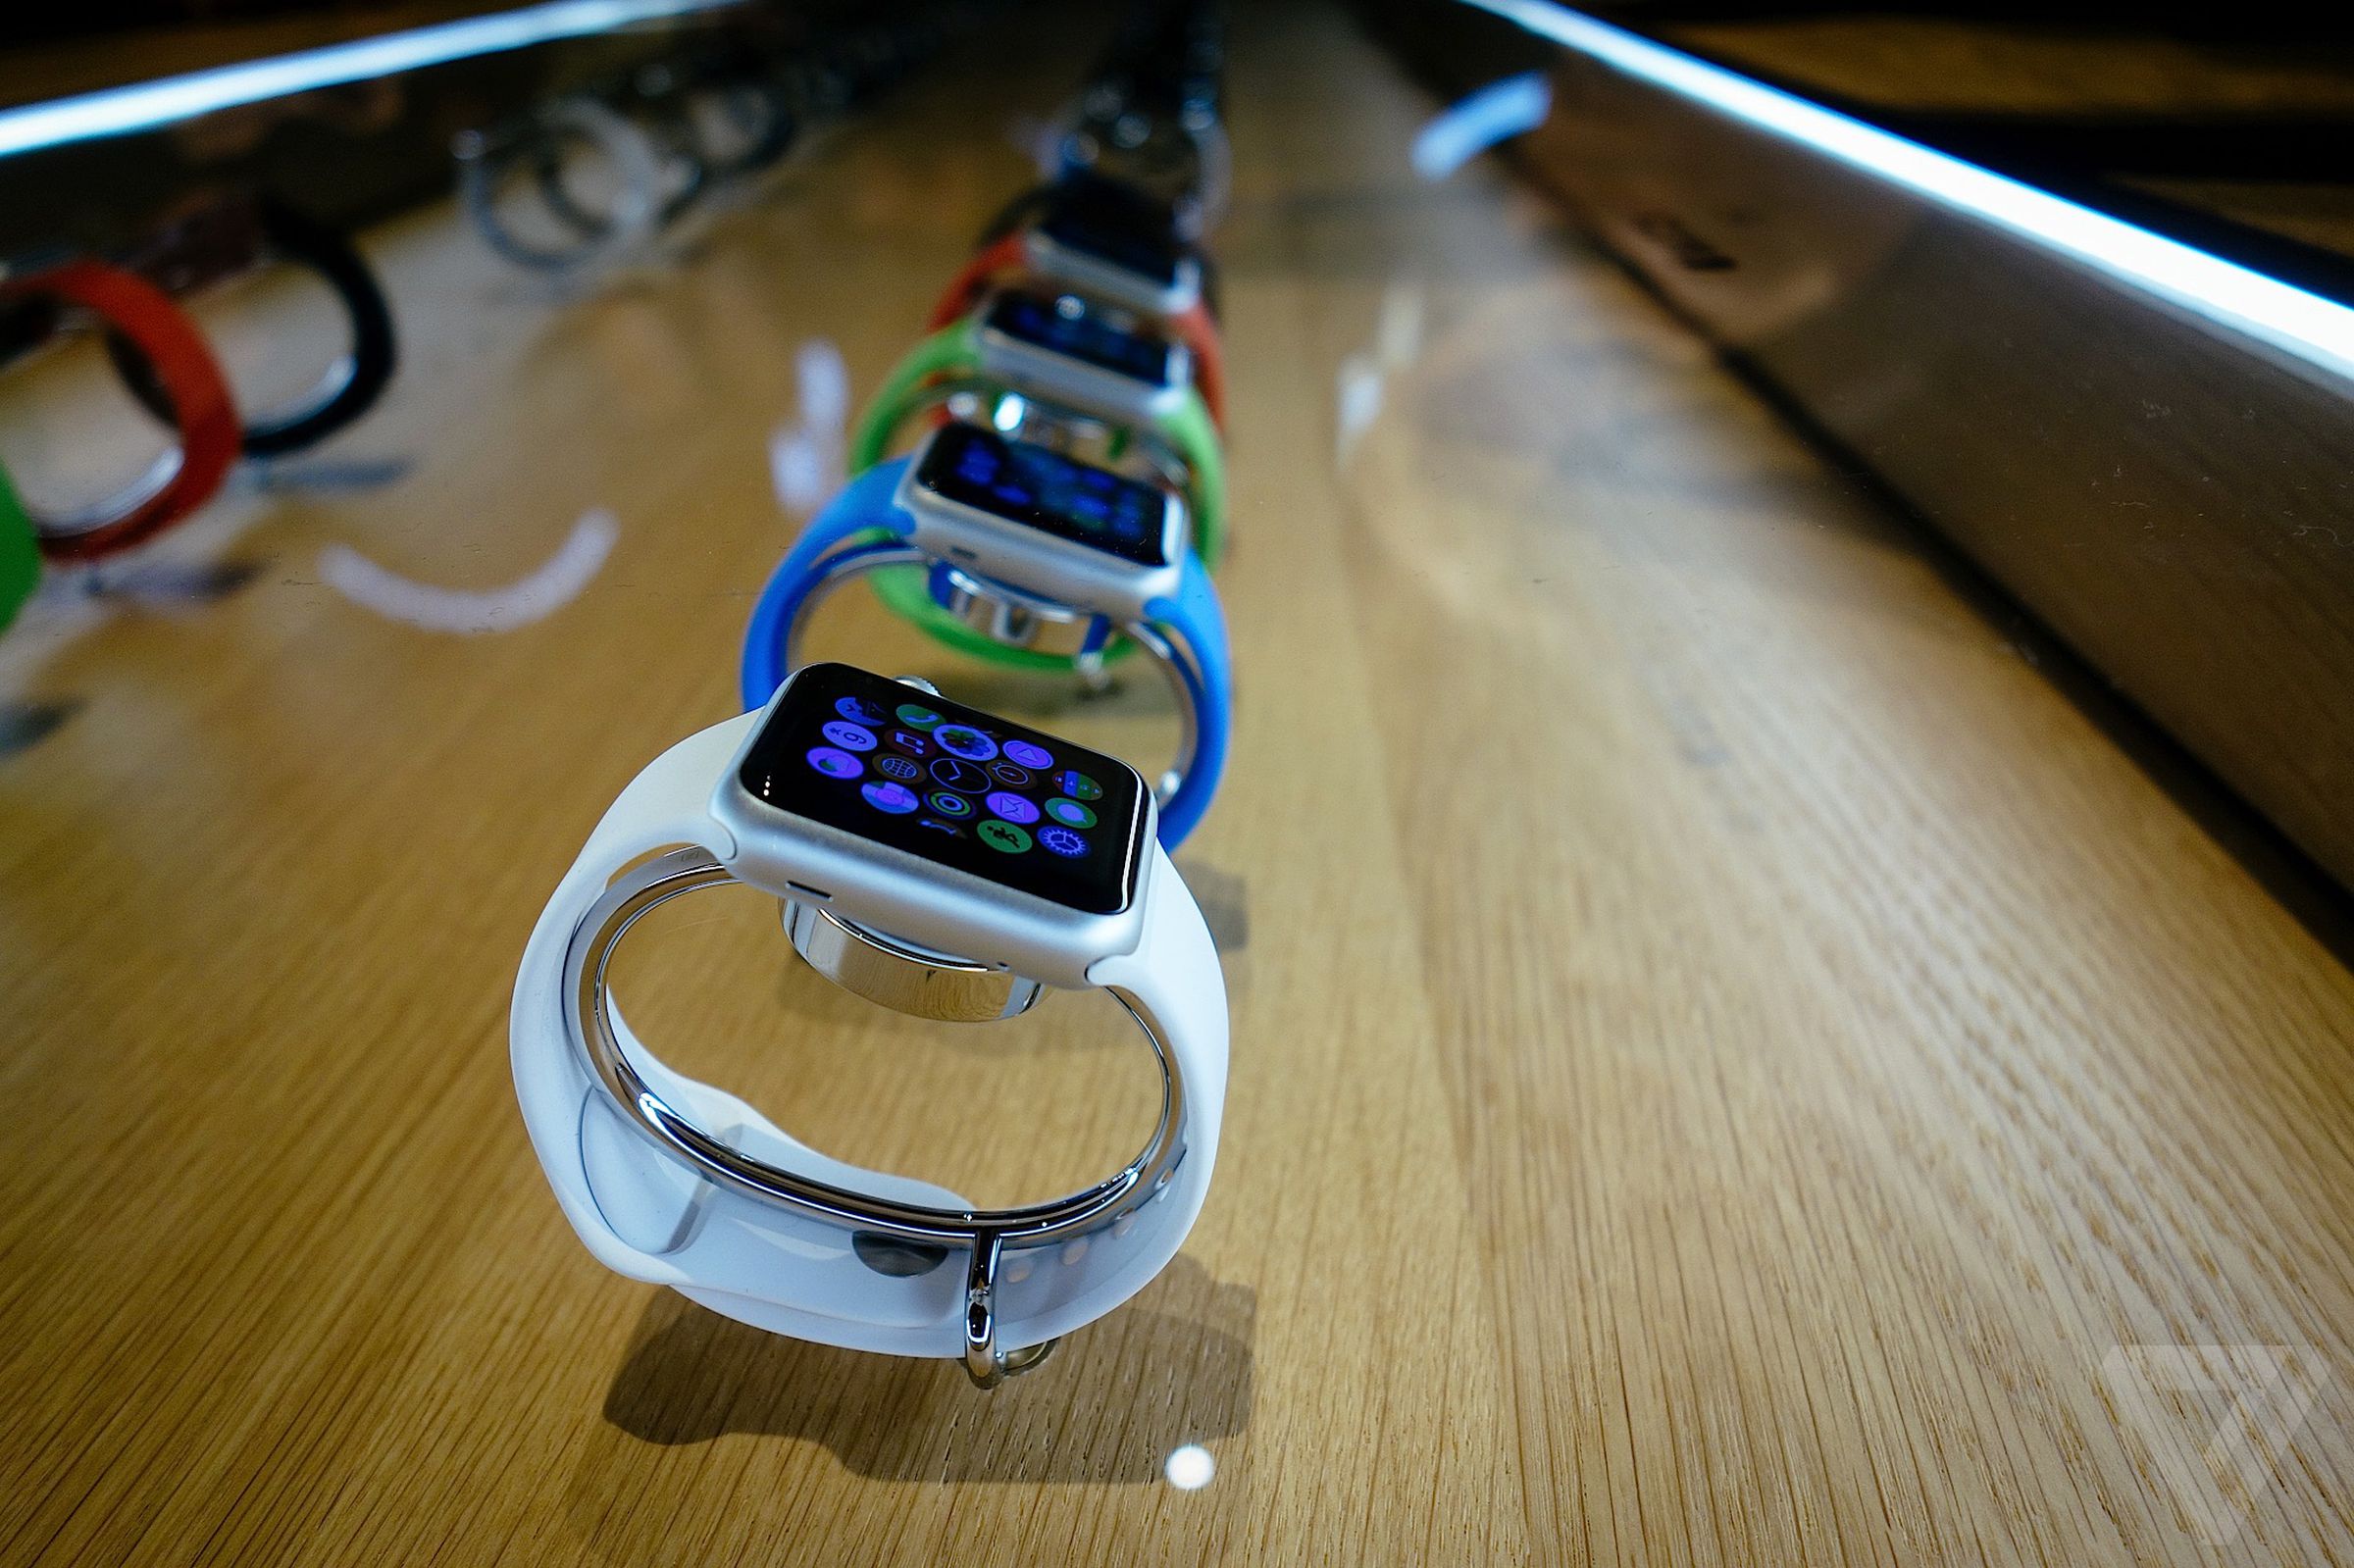 Department stores show the Apple Watch